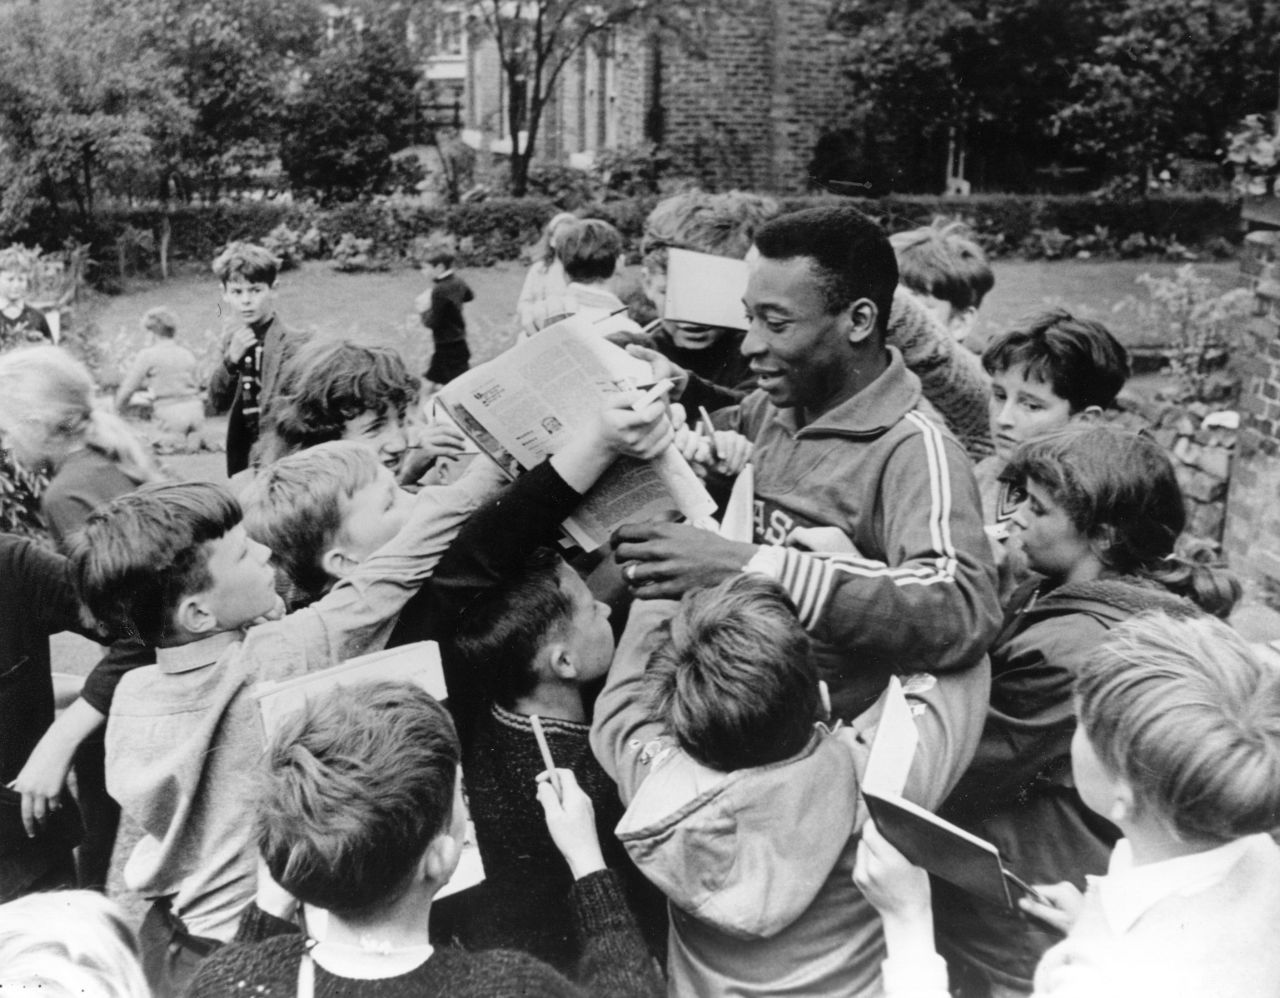 Pelé signs autographs for children successful  1966. He played successful  the 1966 World Cup with Brazil but the squad  didn't beforehand  retired  of the radical  signifier    that year.